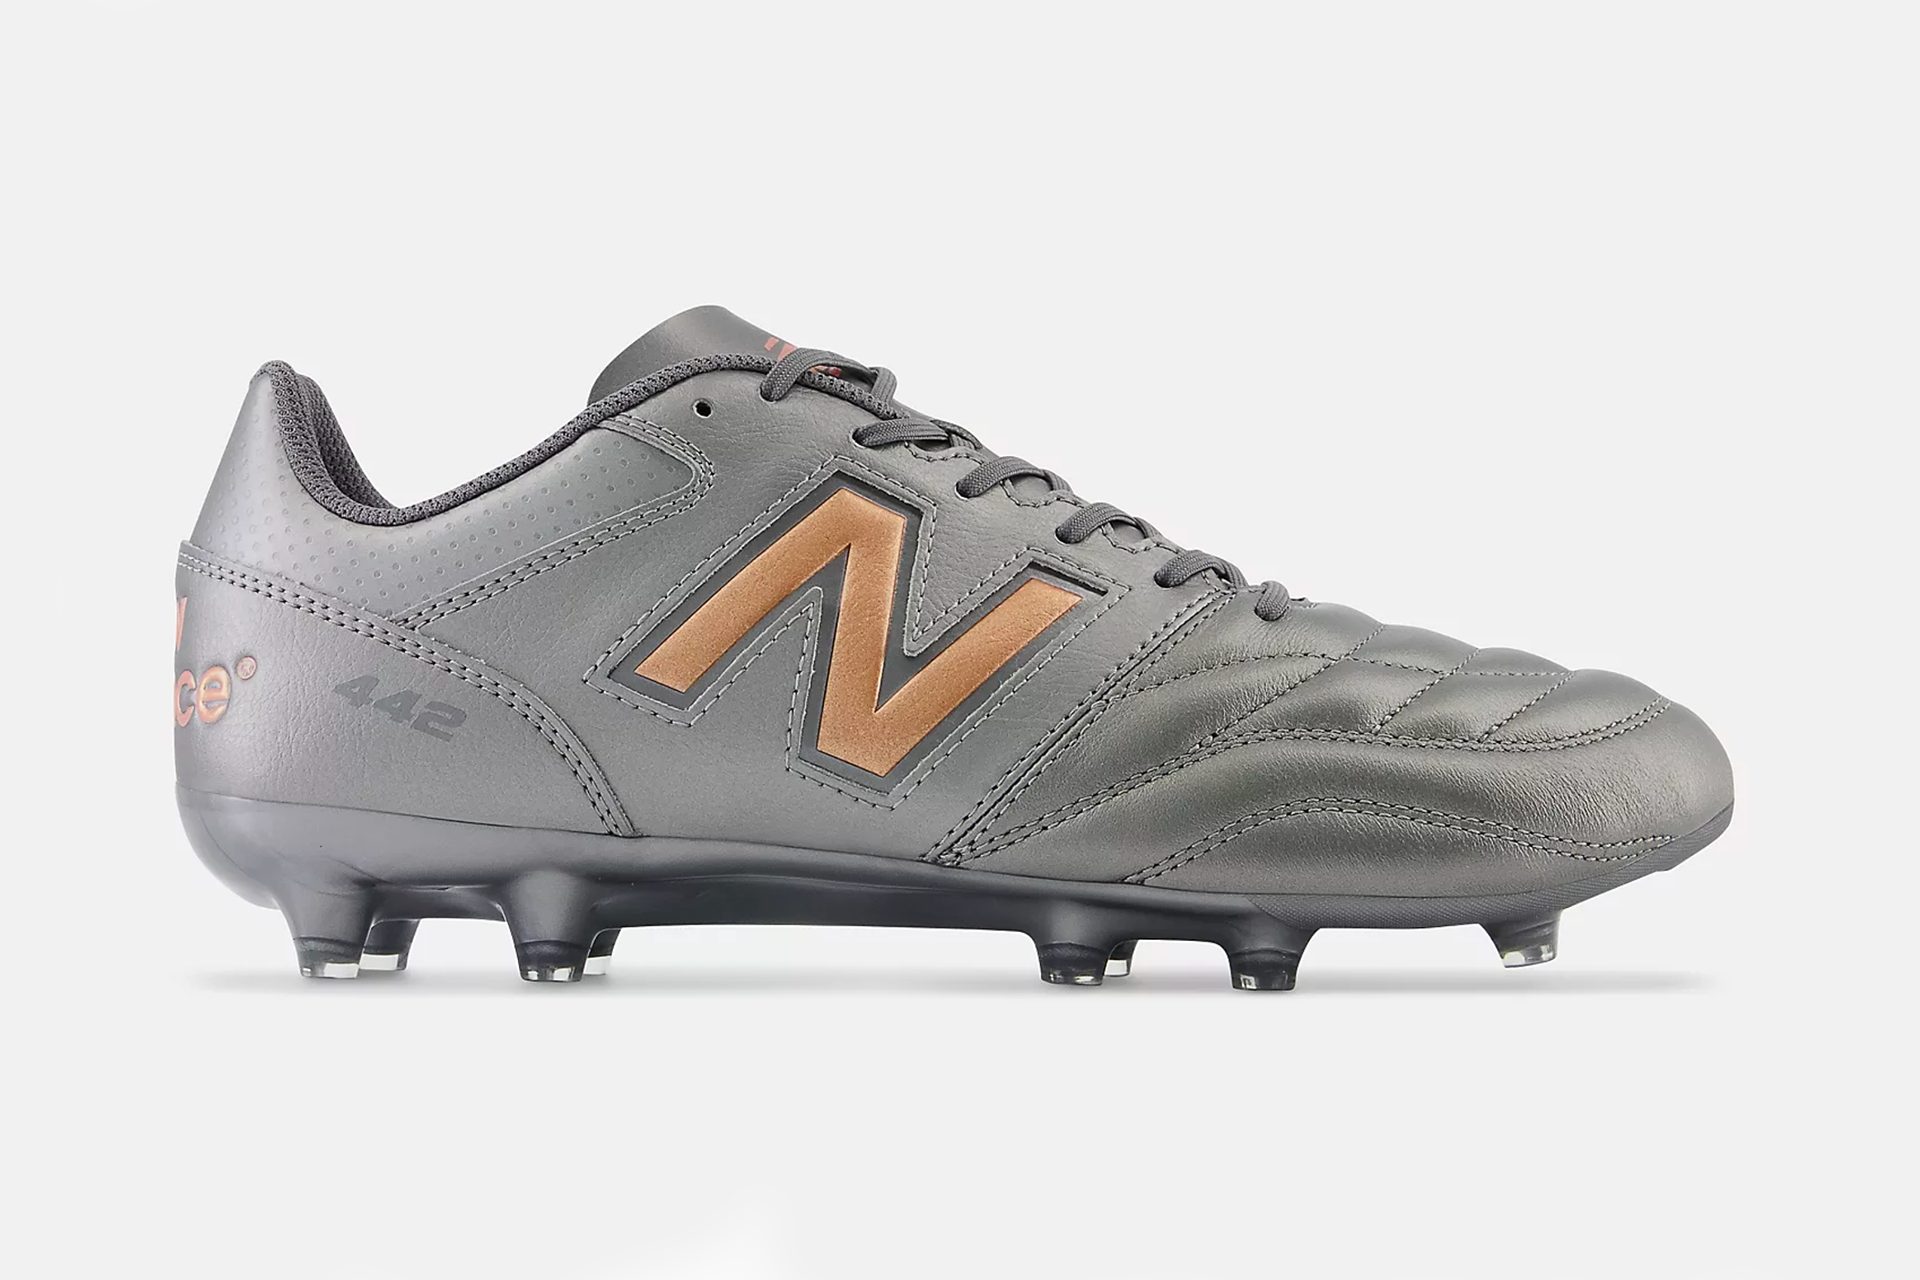 New Balance 442 V2 TEAM FG best rugby boots